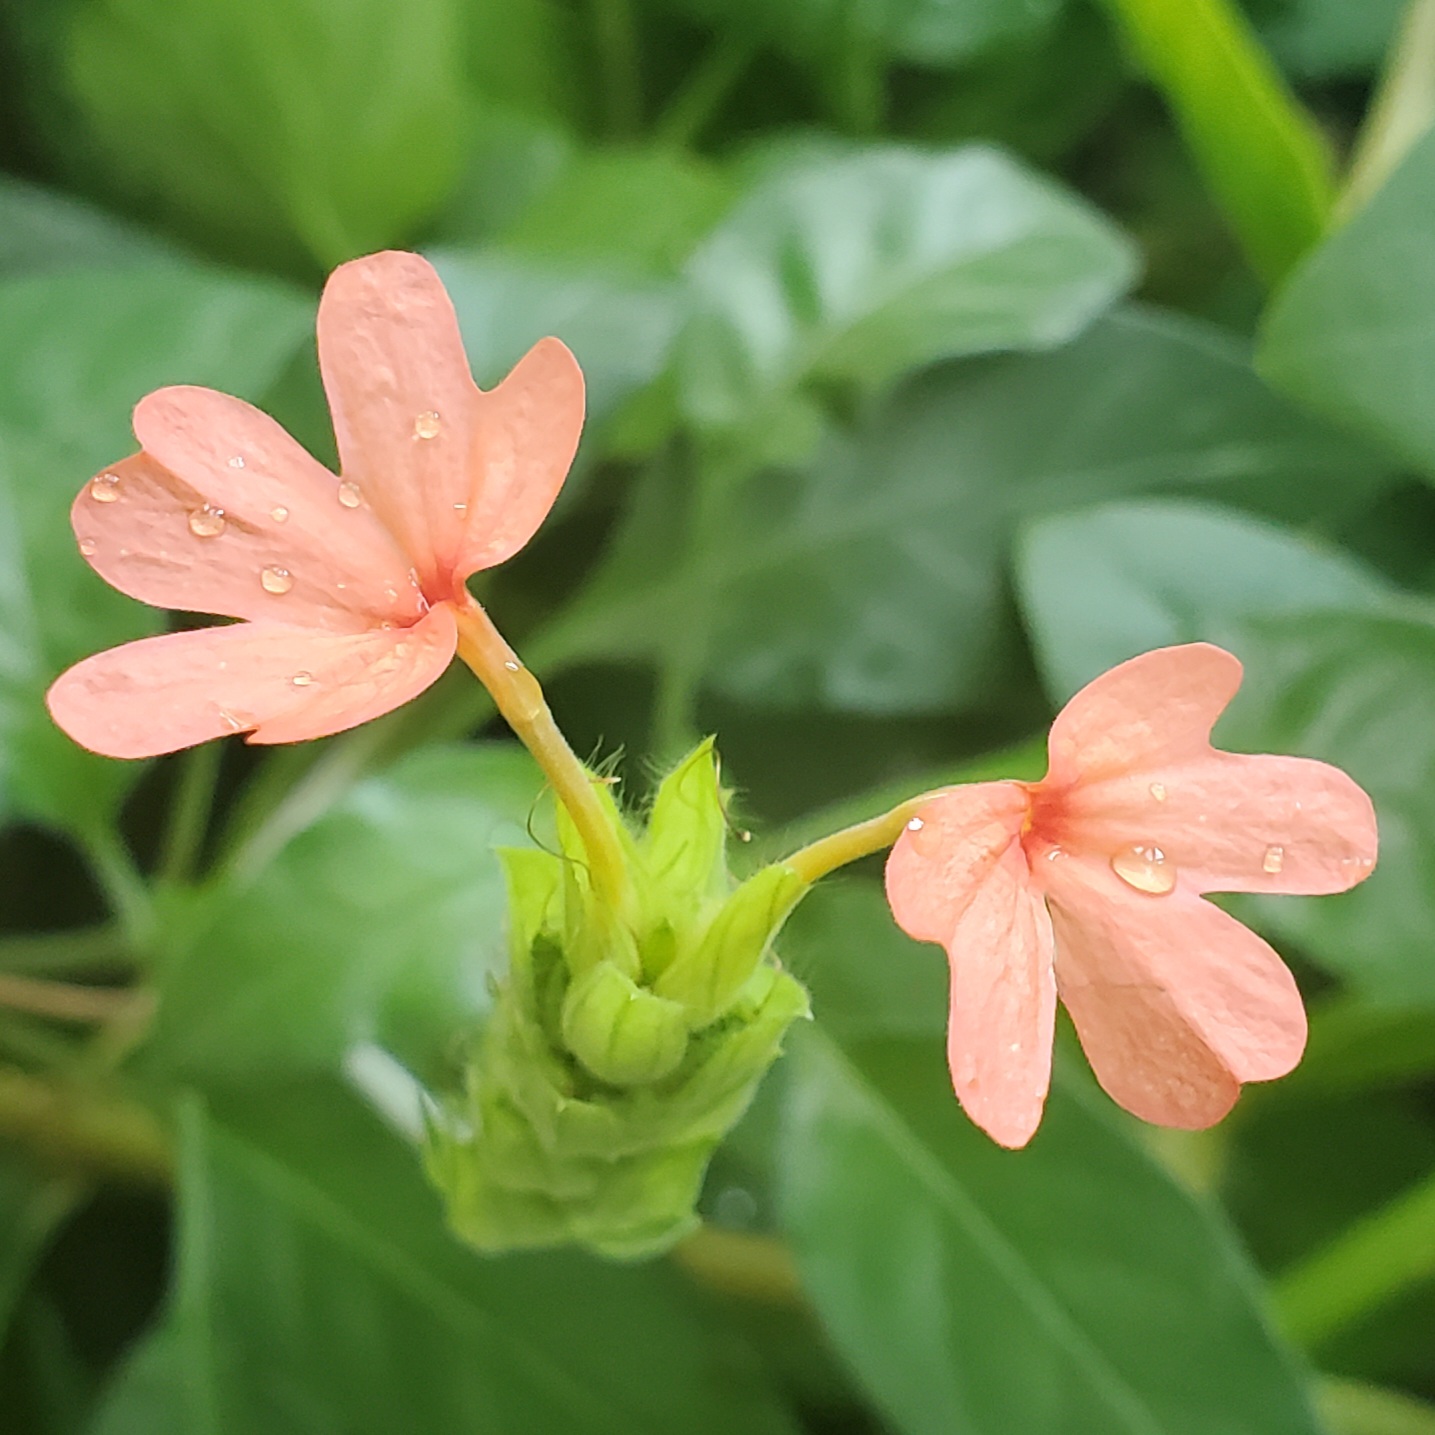 Two pink flowers dotted with dew on a leafy green background.